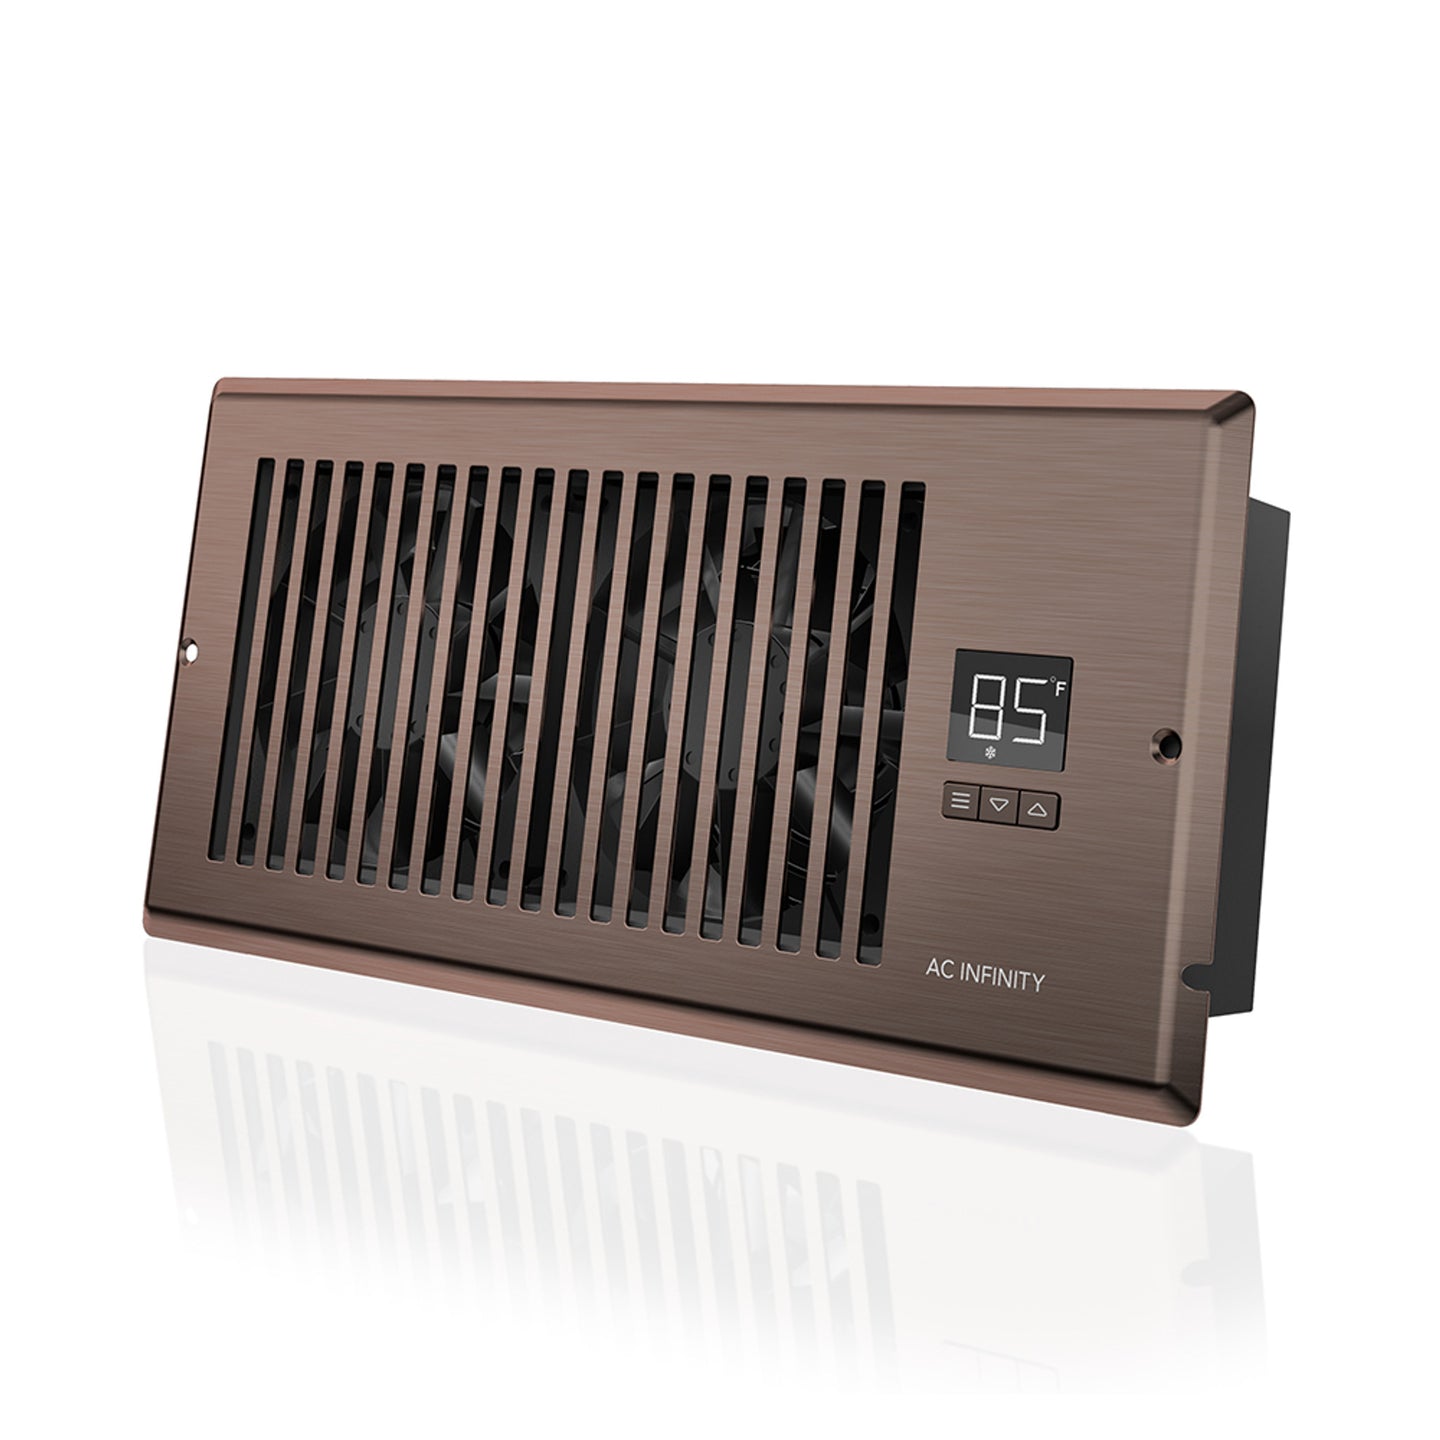 AC Infinity AIRTAP T4, Quiet Register Booster Fan System, Brown Bronze, for 4